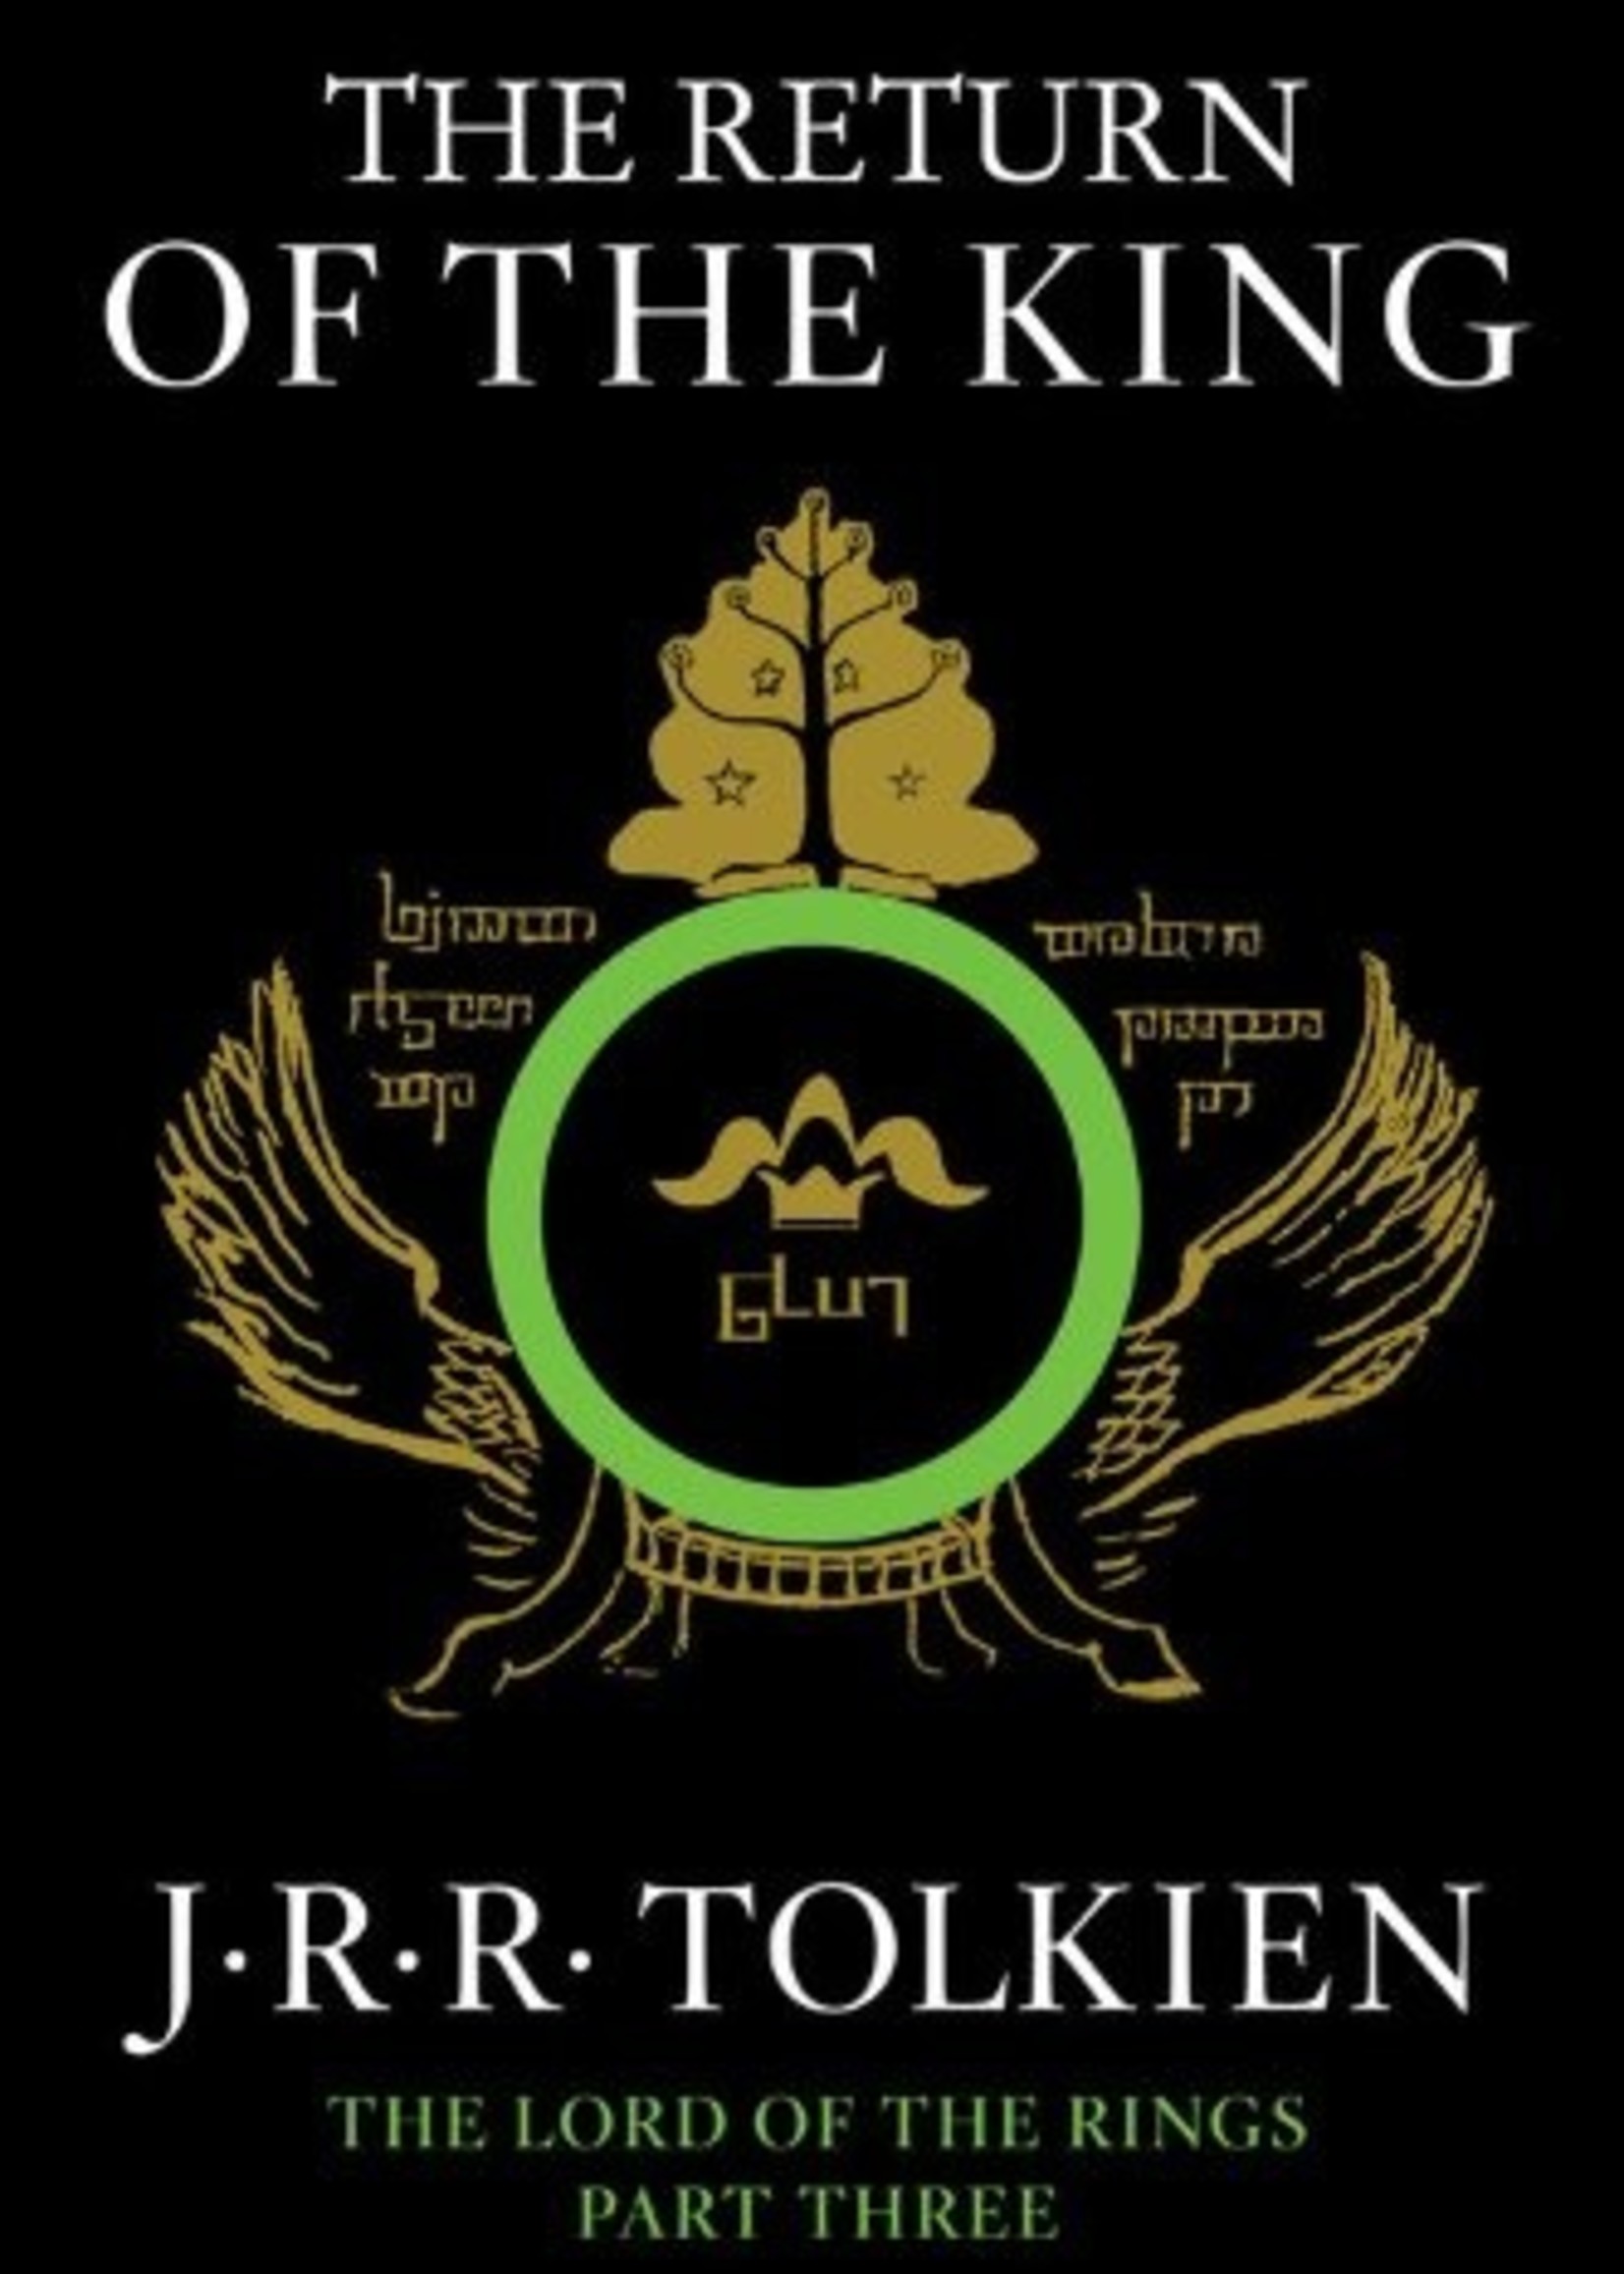 Return of the King by J.R.R. Tolkien – The Critiquing Chemist